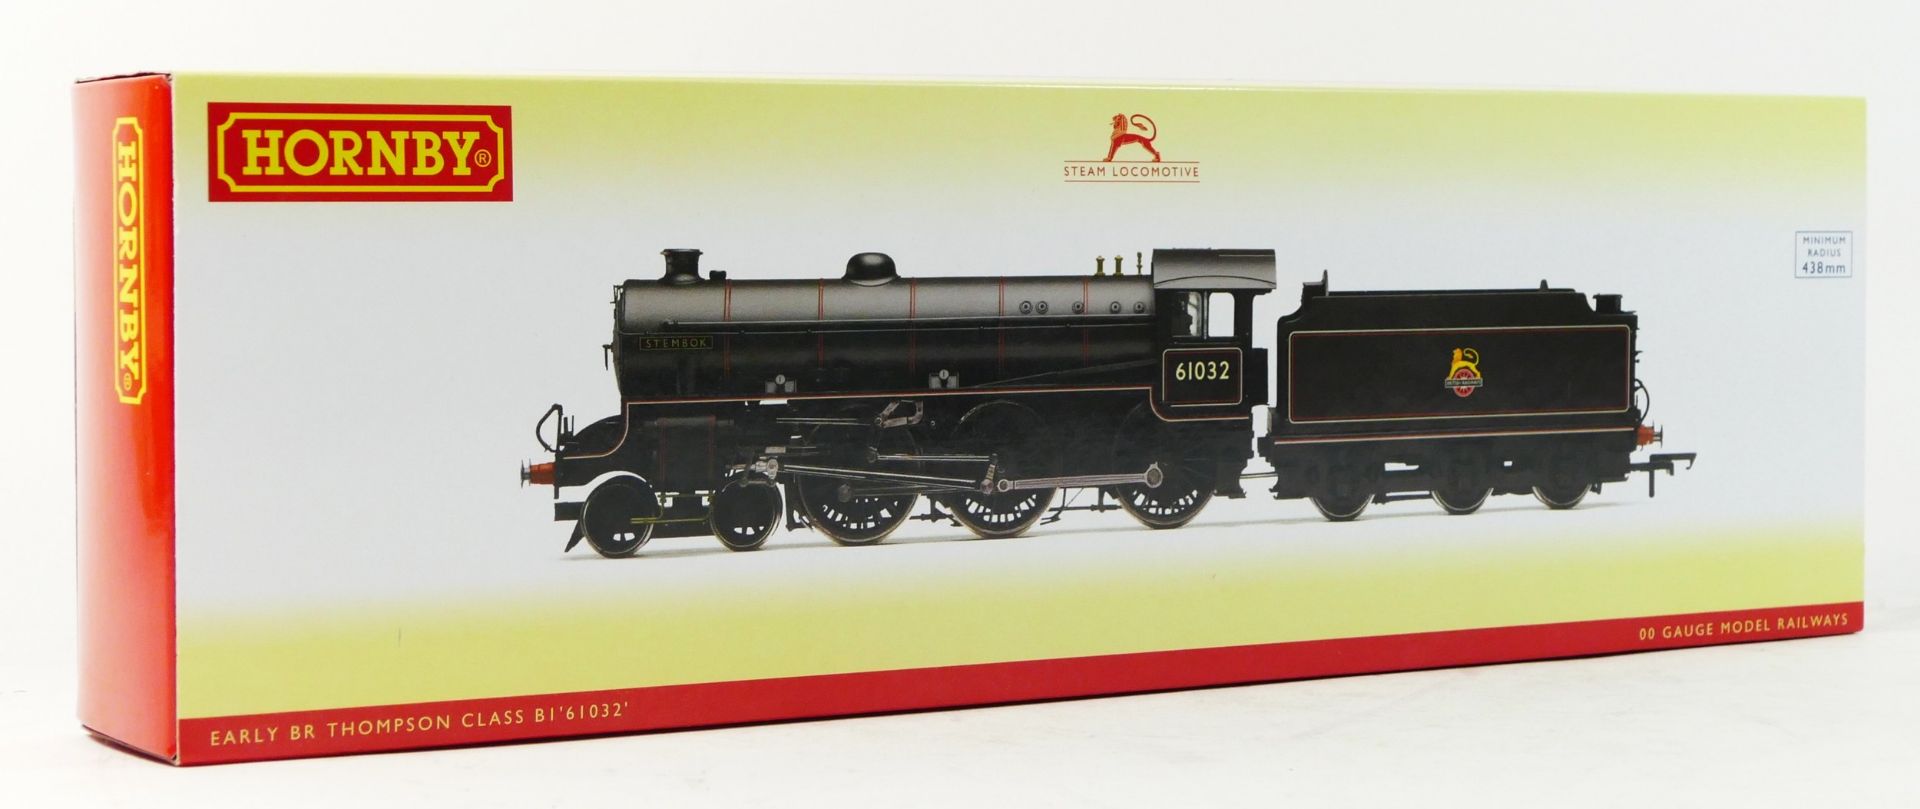 OO gauge, Hornby locomotive with tender (R3451) to include a BR Thompson class BI ‘61032’ loco in BR - Image 3 of 3